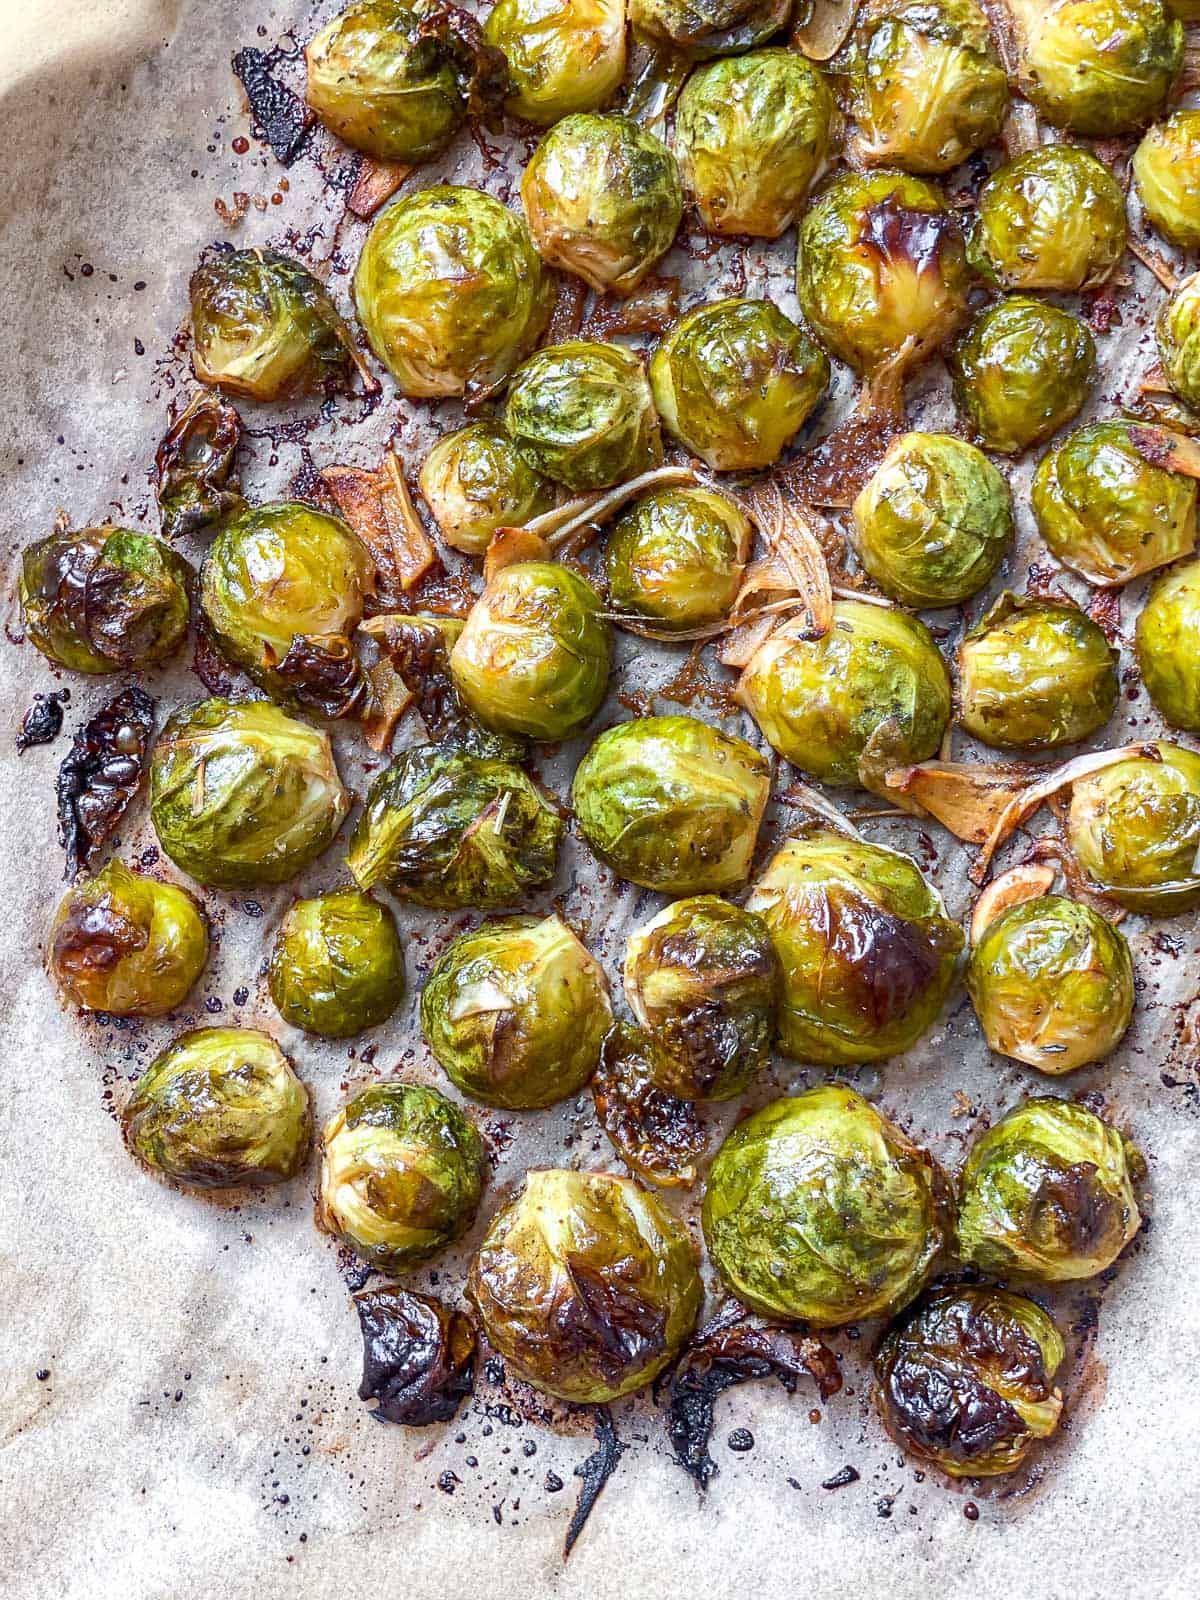 process s،t of brussels sprouts post being baked on baking tray